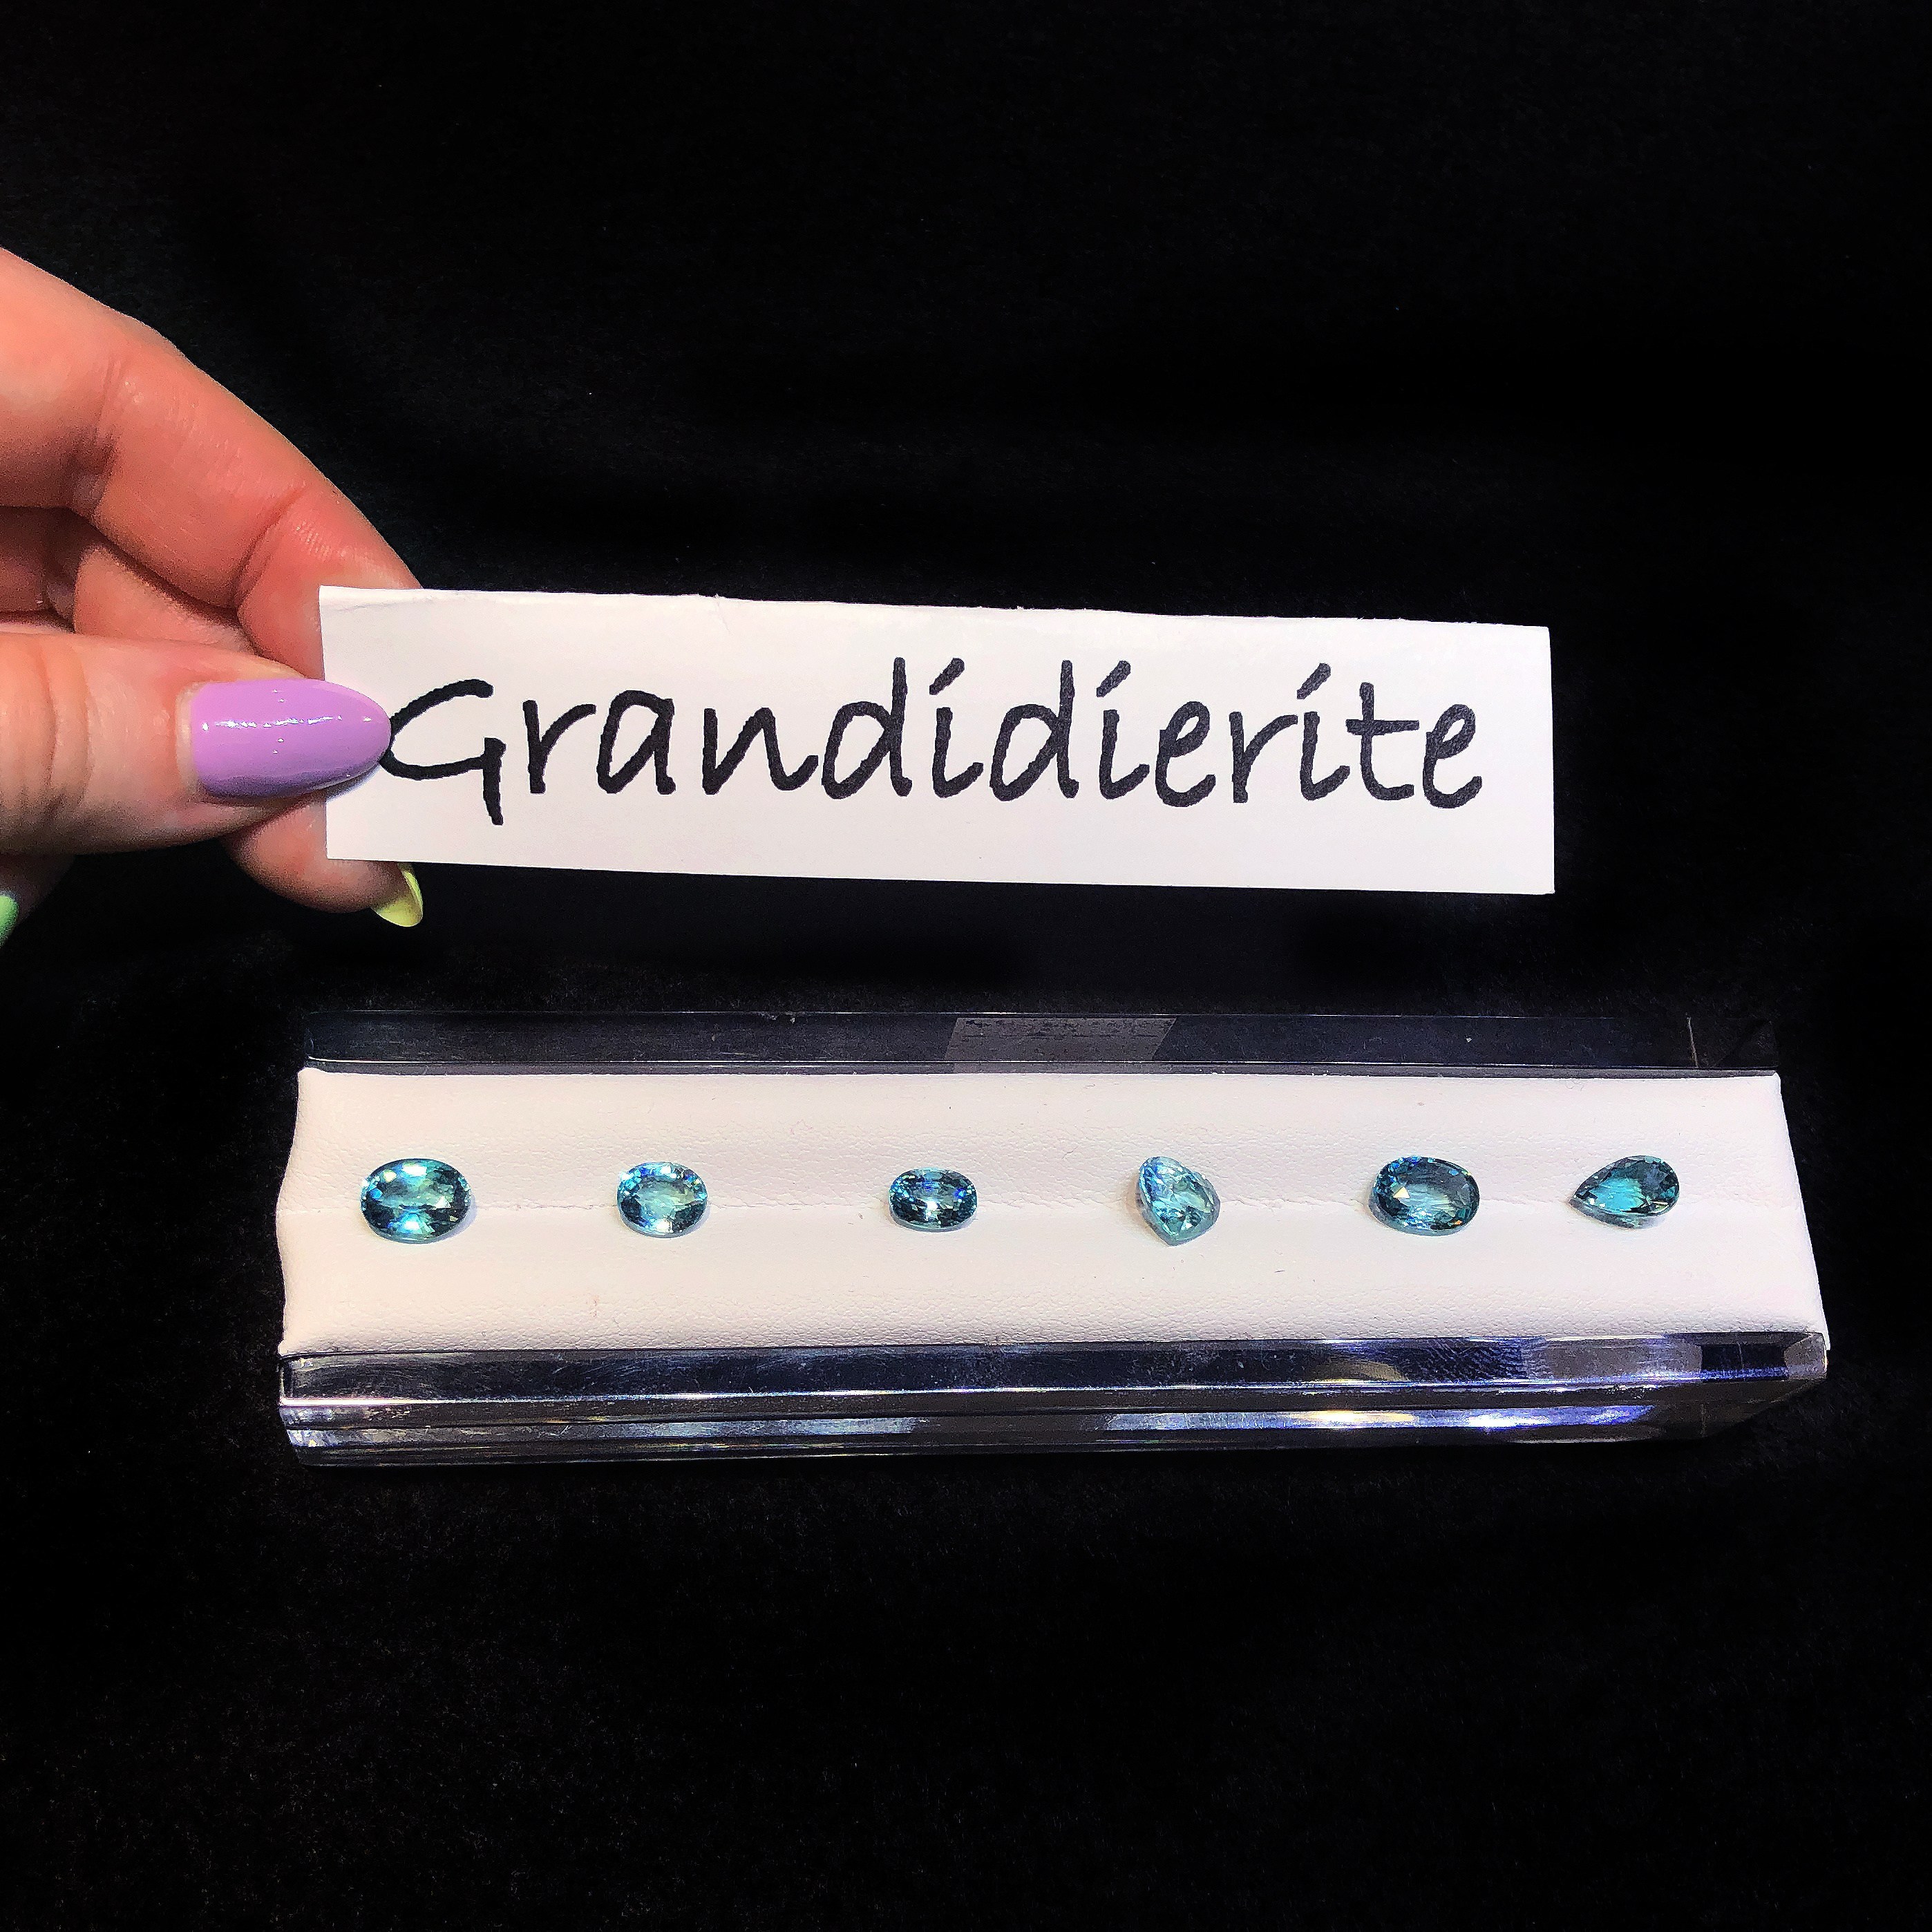 I had never seen the rare gem grandidierite until I visited Michael Couch's booth at the 2019 AGTA GemFair.